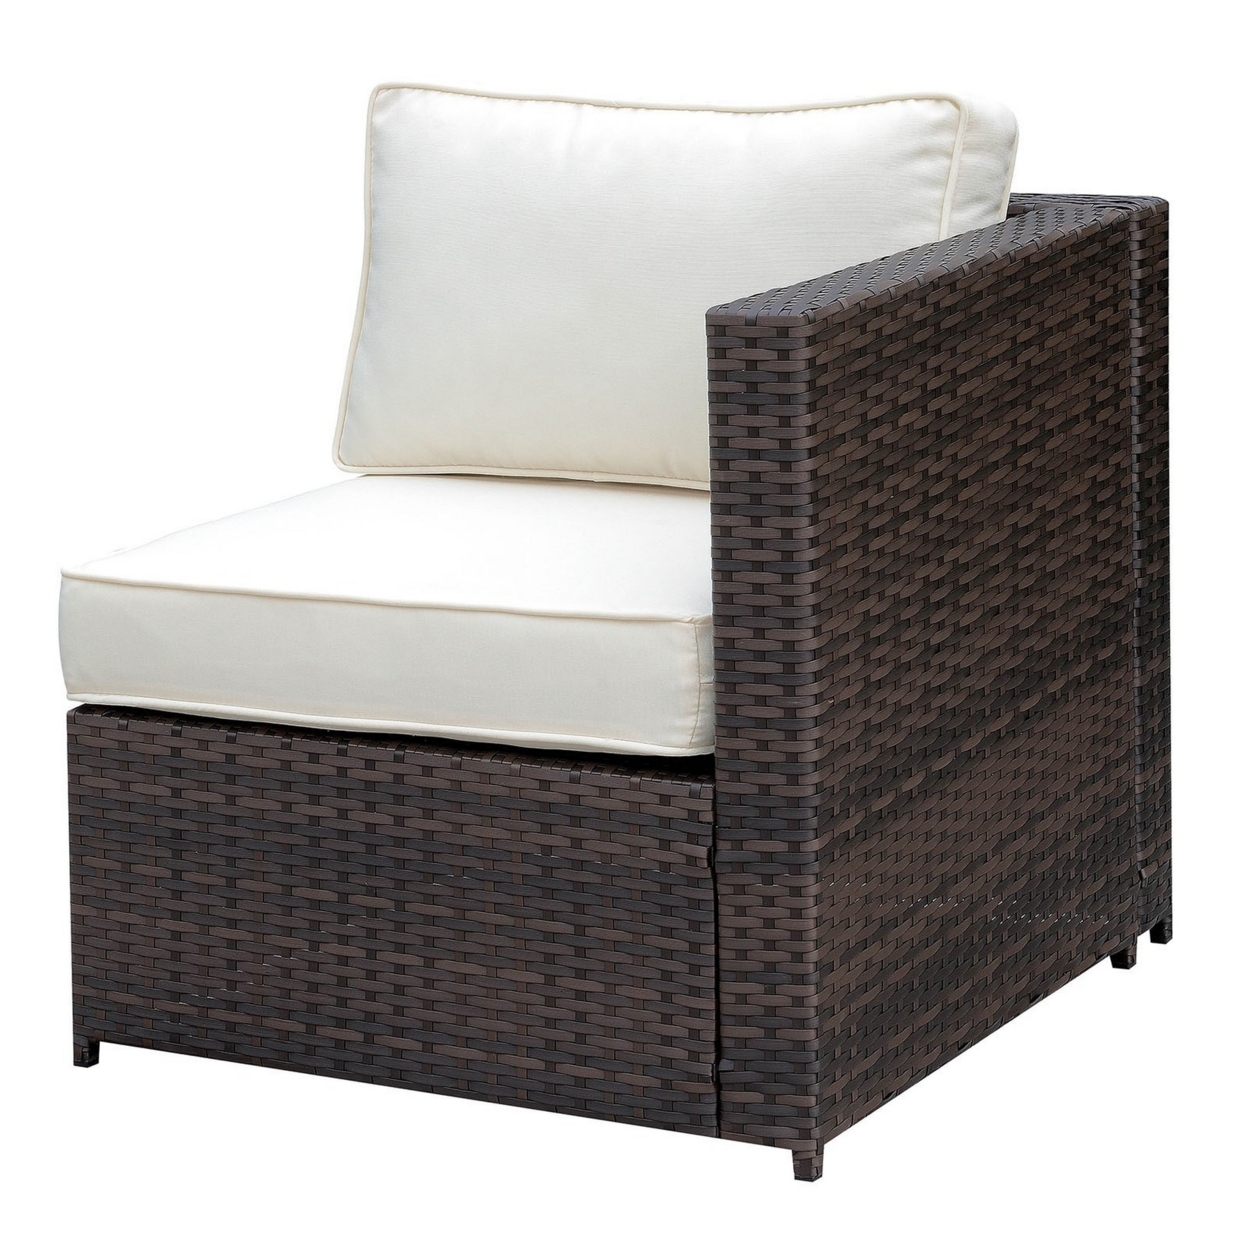 Faux Rattan Left Arm Chair With Seat & Back Cushions, Brown And Ivory- Saltoro Sherpi